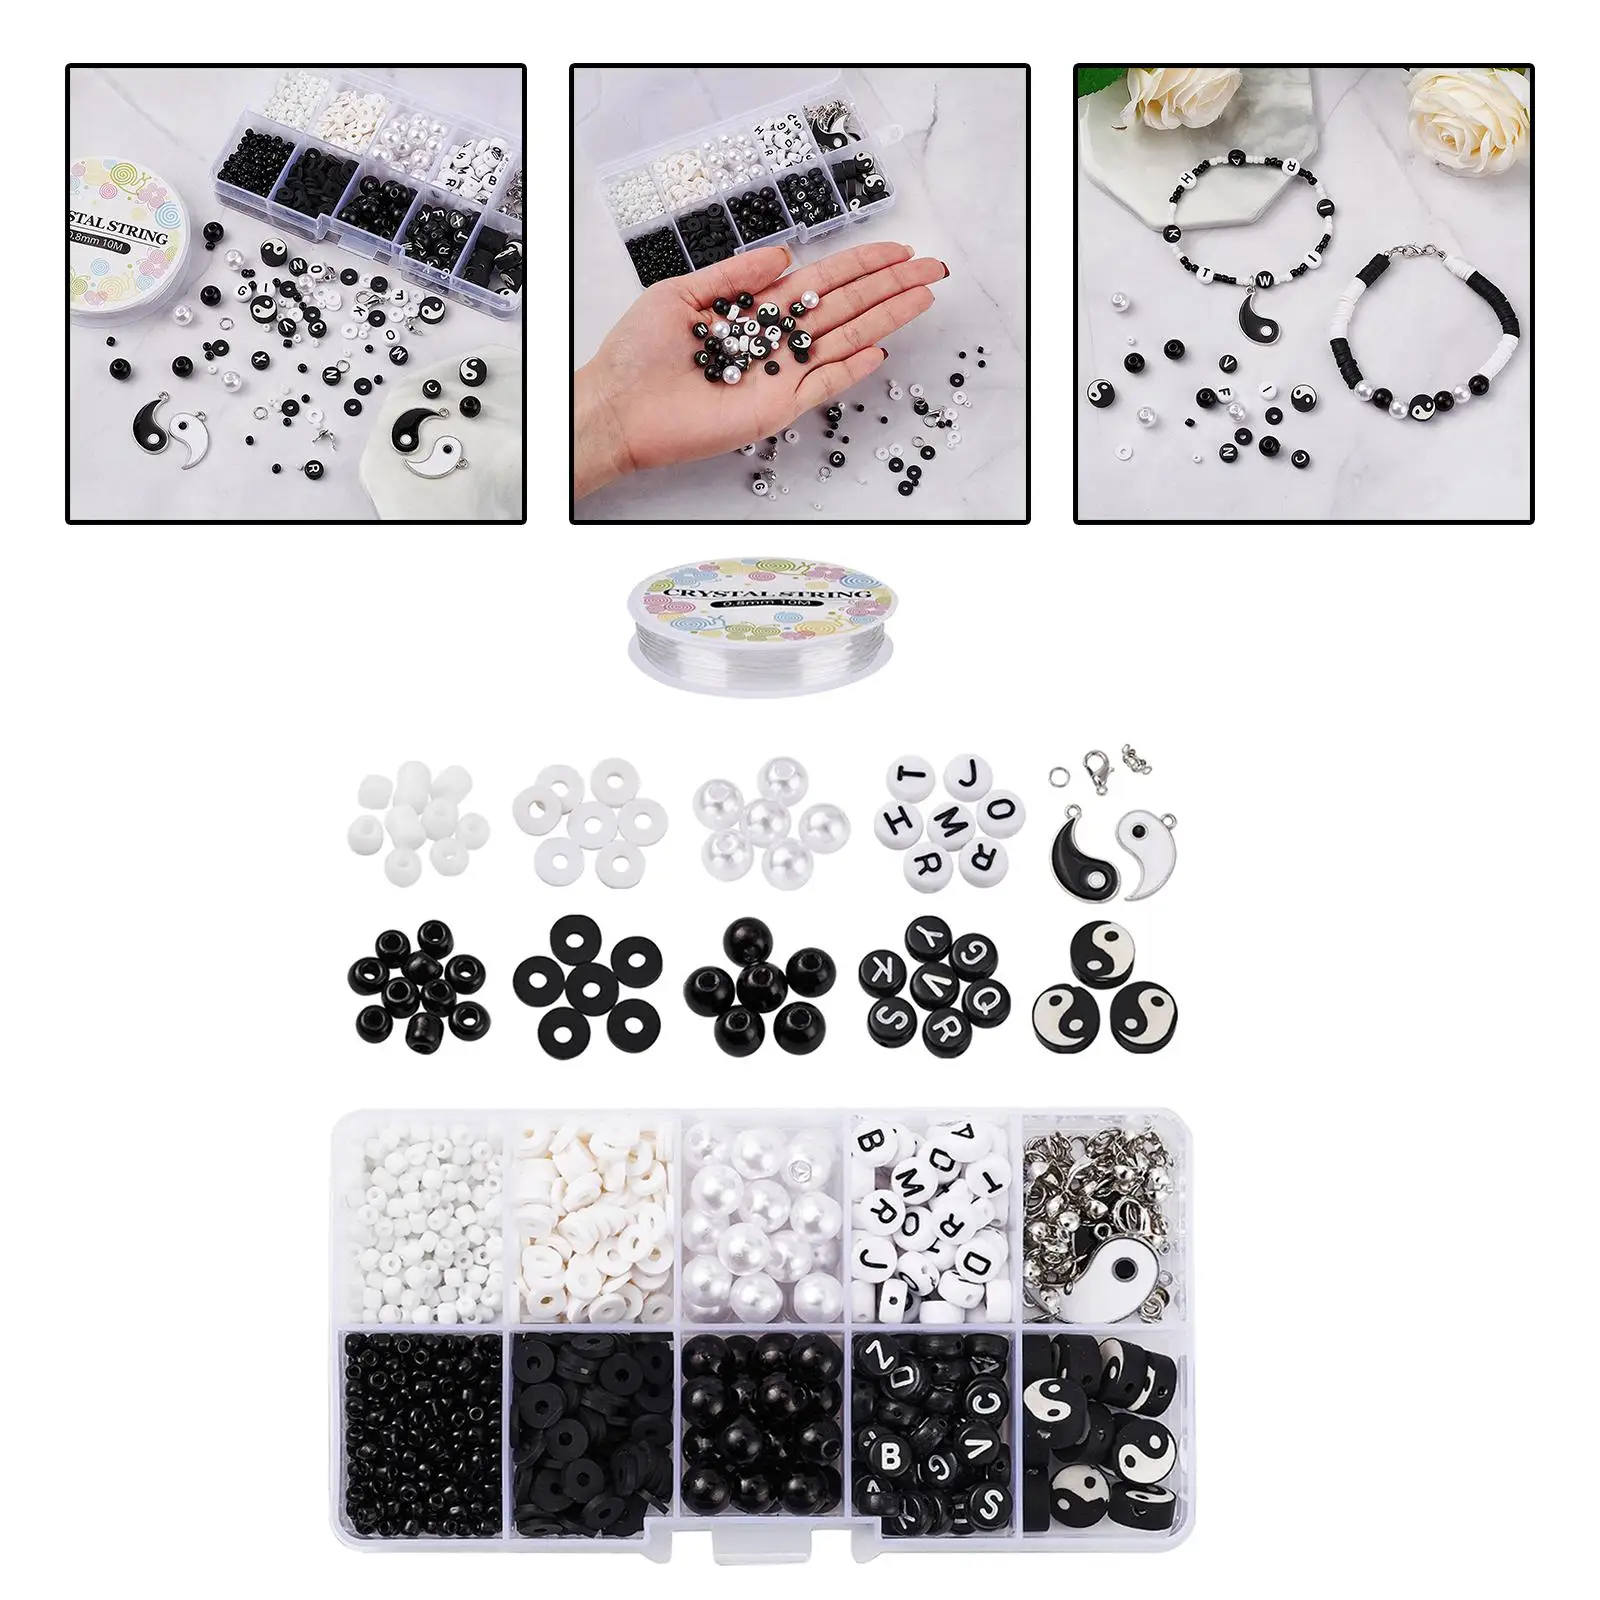 Yin Yang Polymer Clay Bead Set Jewelry Making Handmade Black White Charms for Bracelet Chains Rings Loose Beads with Strings